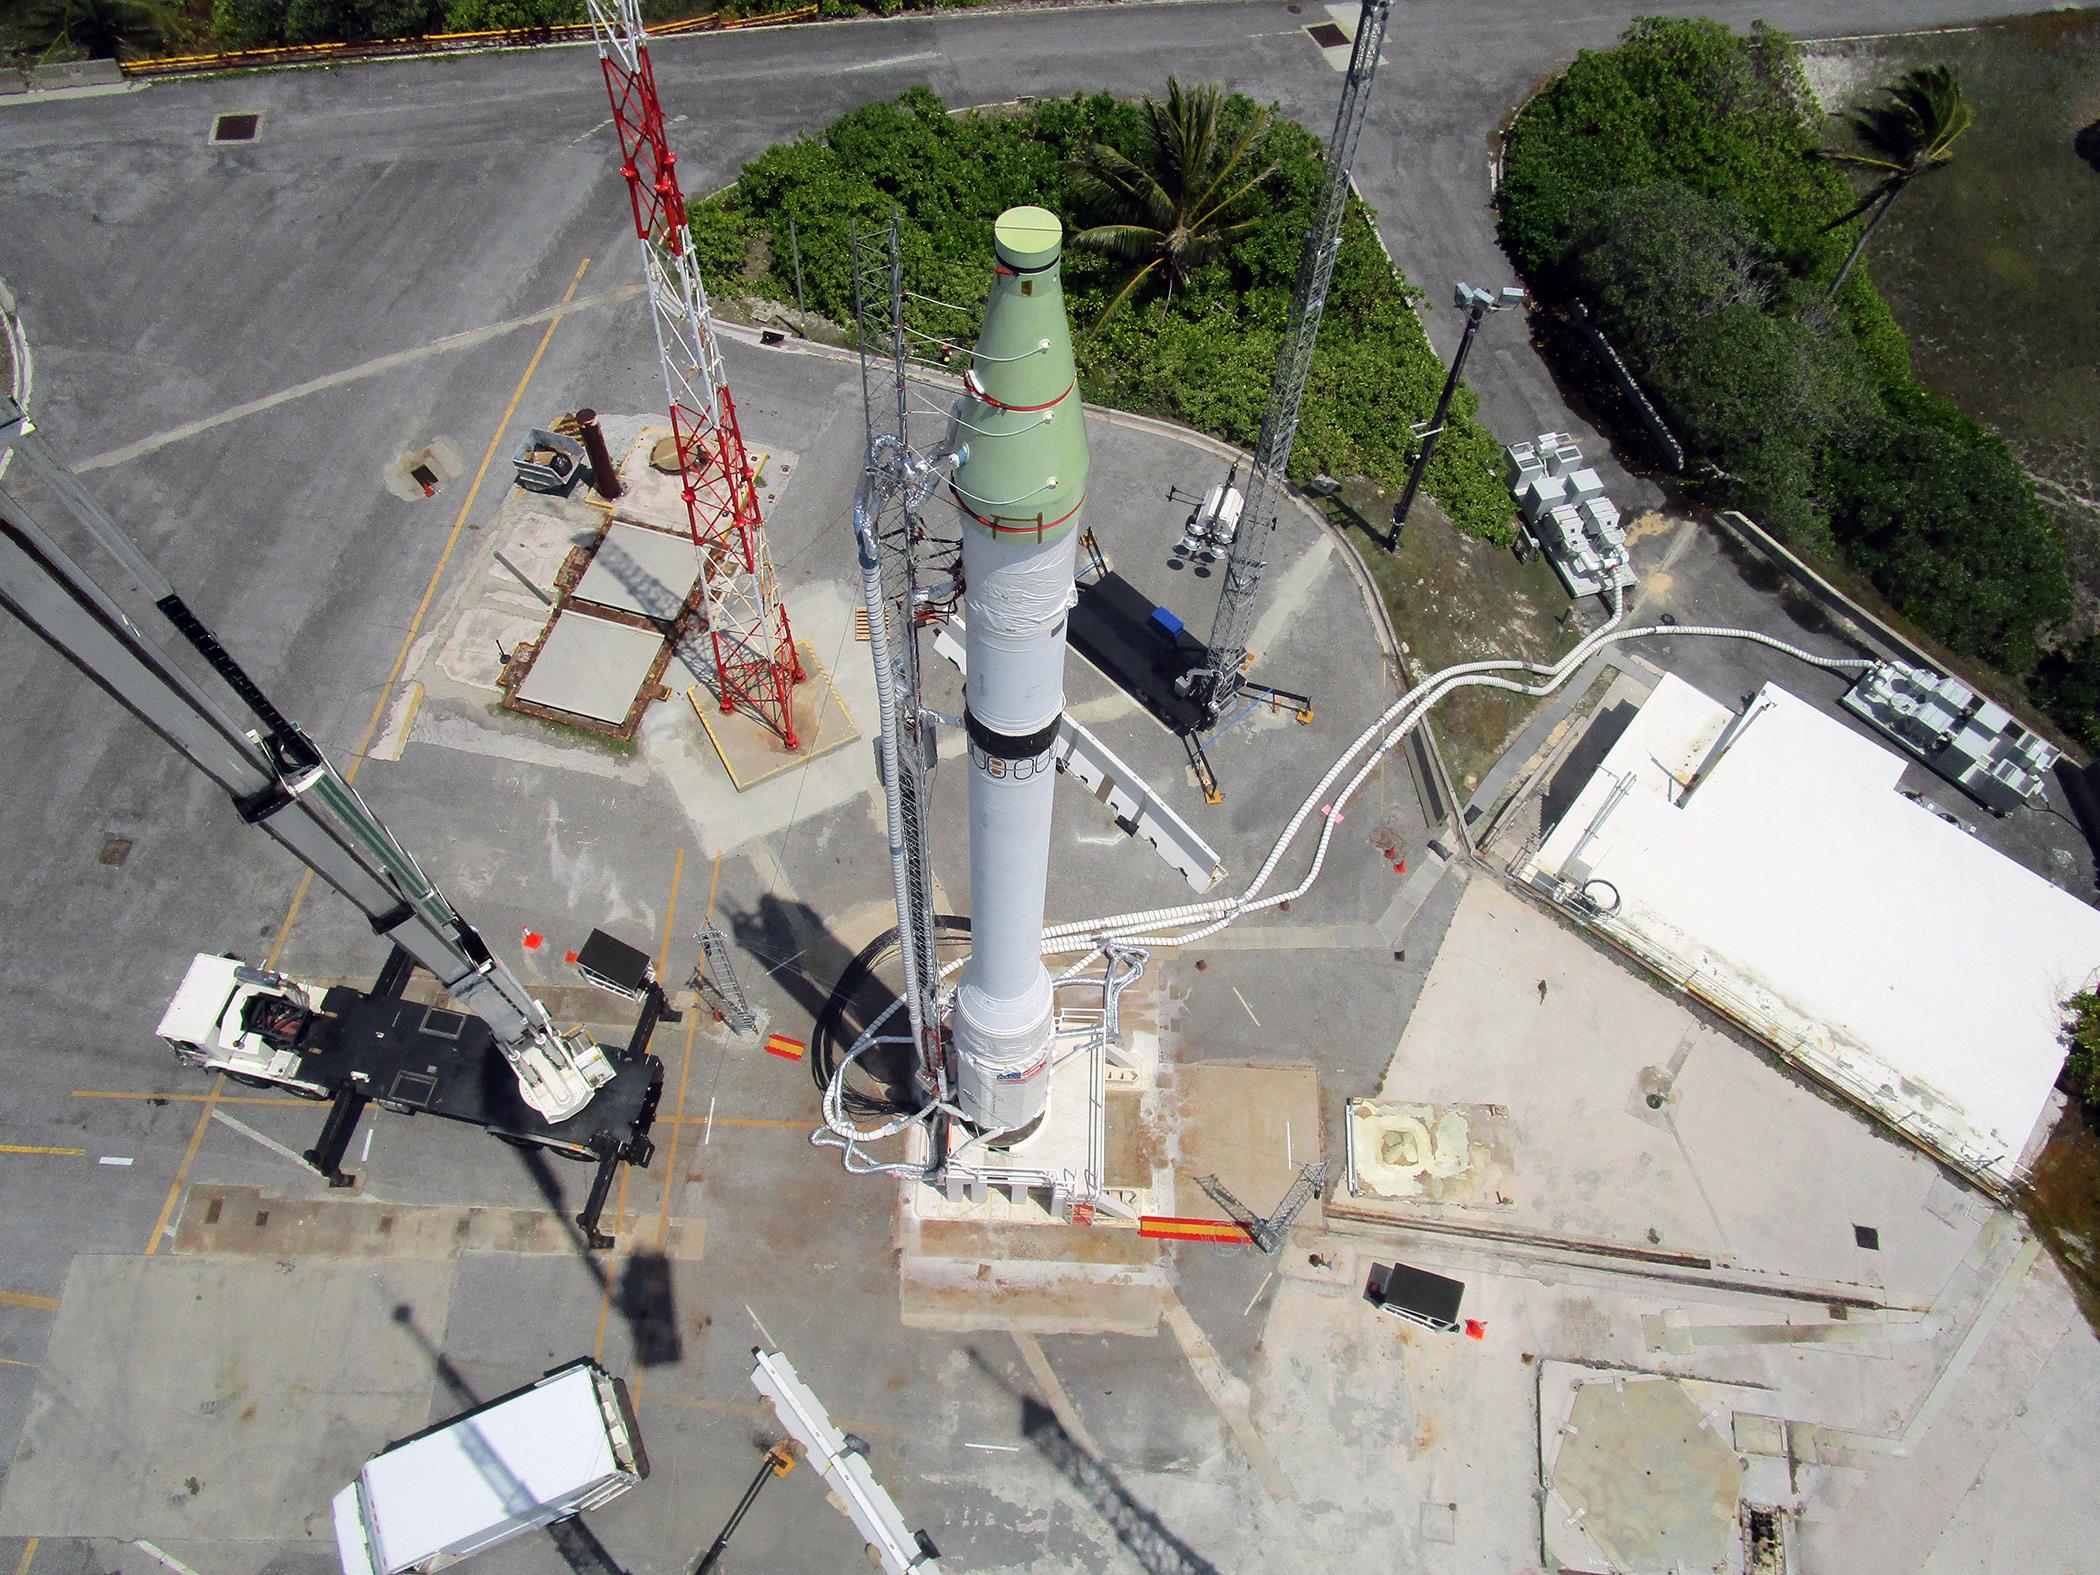 Aerial view of intercontinental ballistic missile-class live-test target before launch 30 May 2017 from the US Army’s Reagan test site on Kwajalein Atoll in the Marshall Islands.